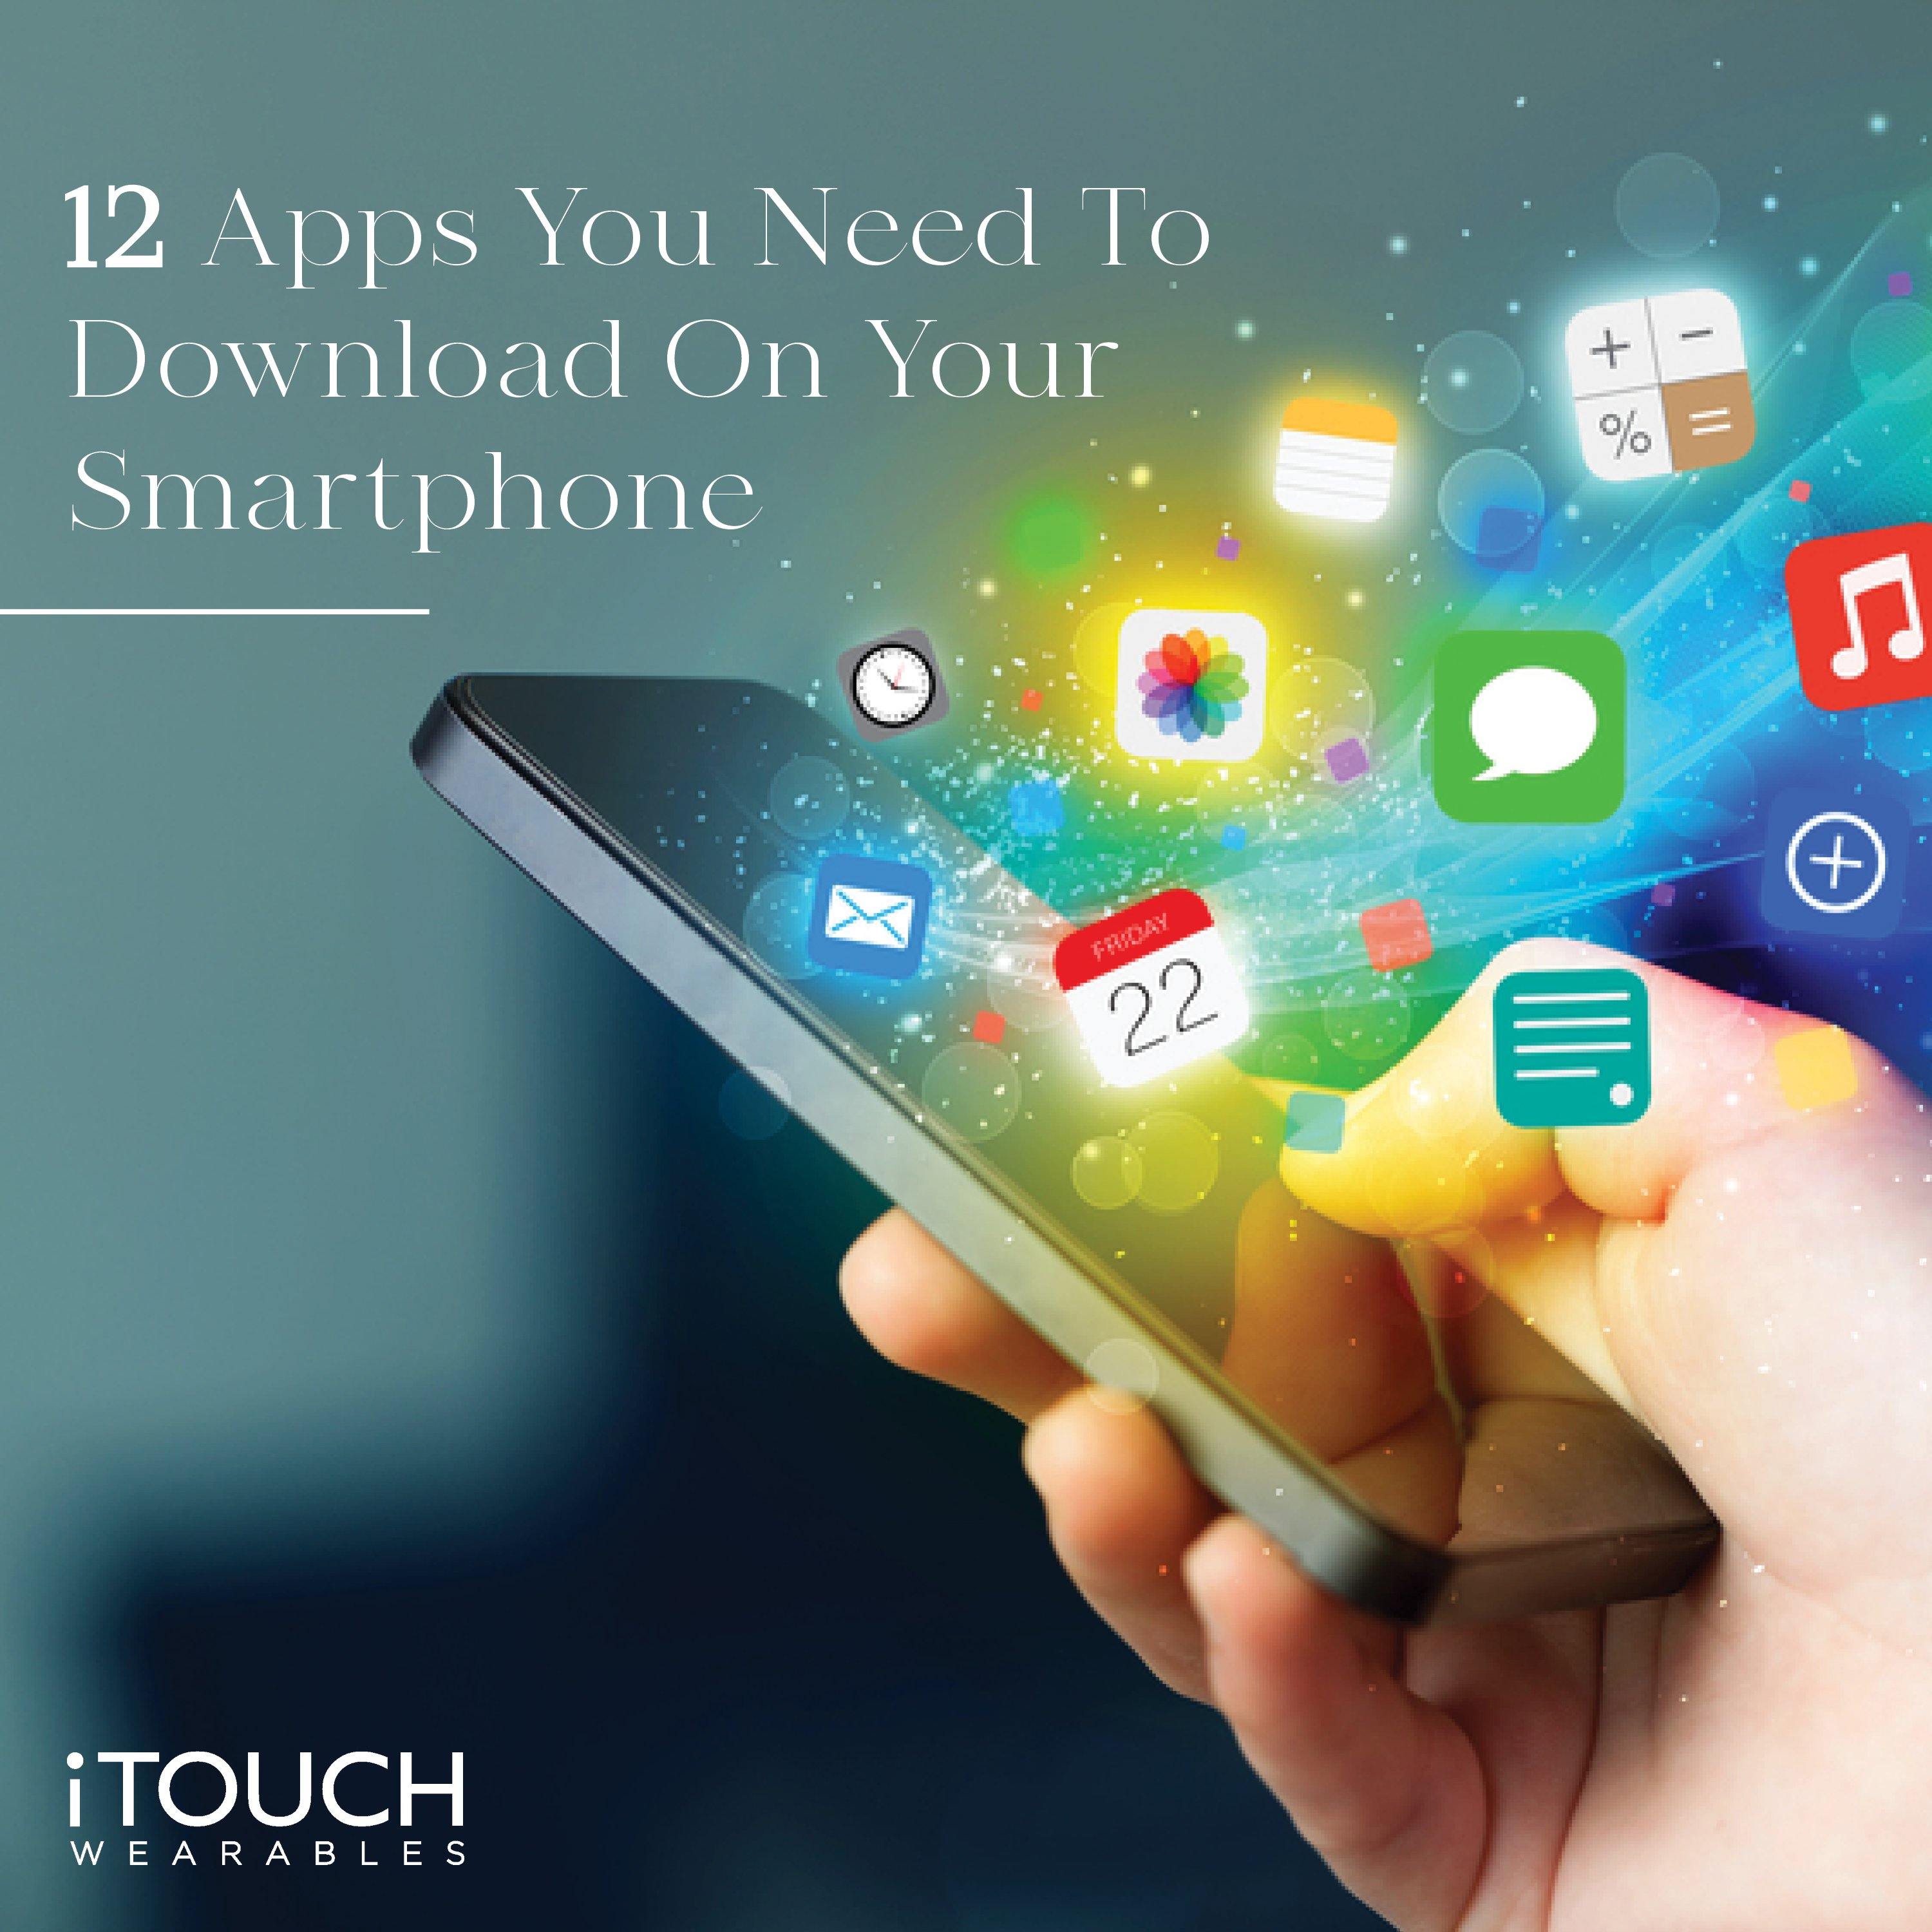 12 Apps You Need To Download On Your Smartphone - iTOUCH Wearables